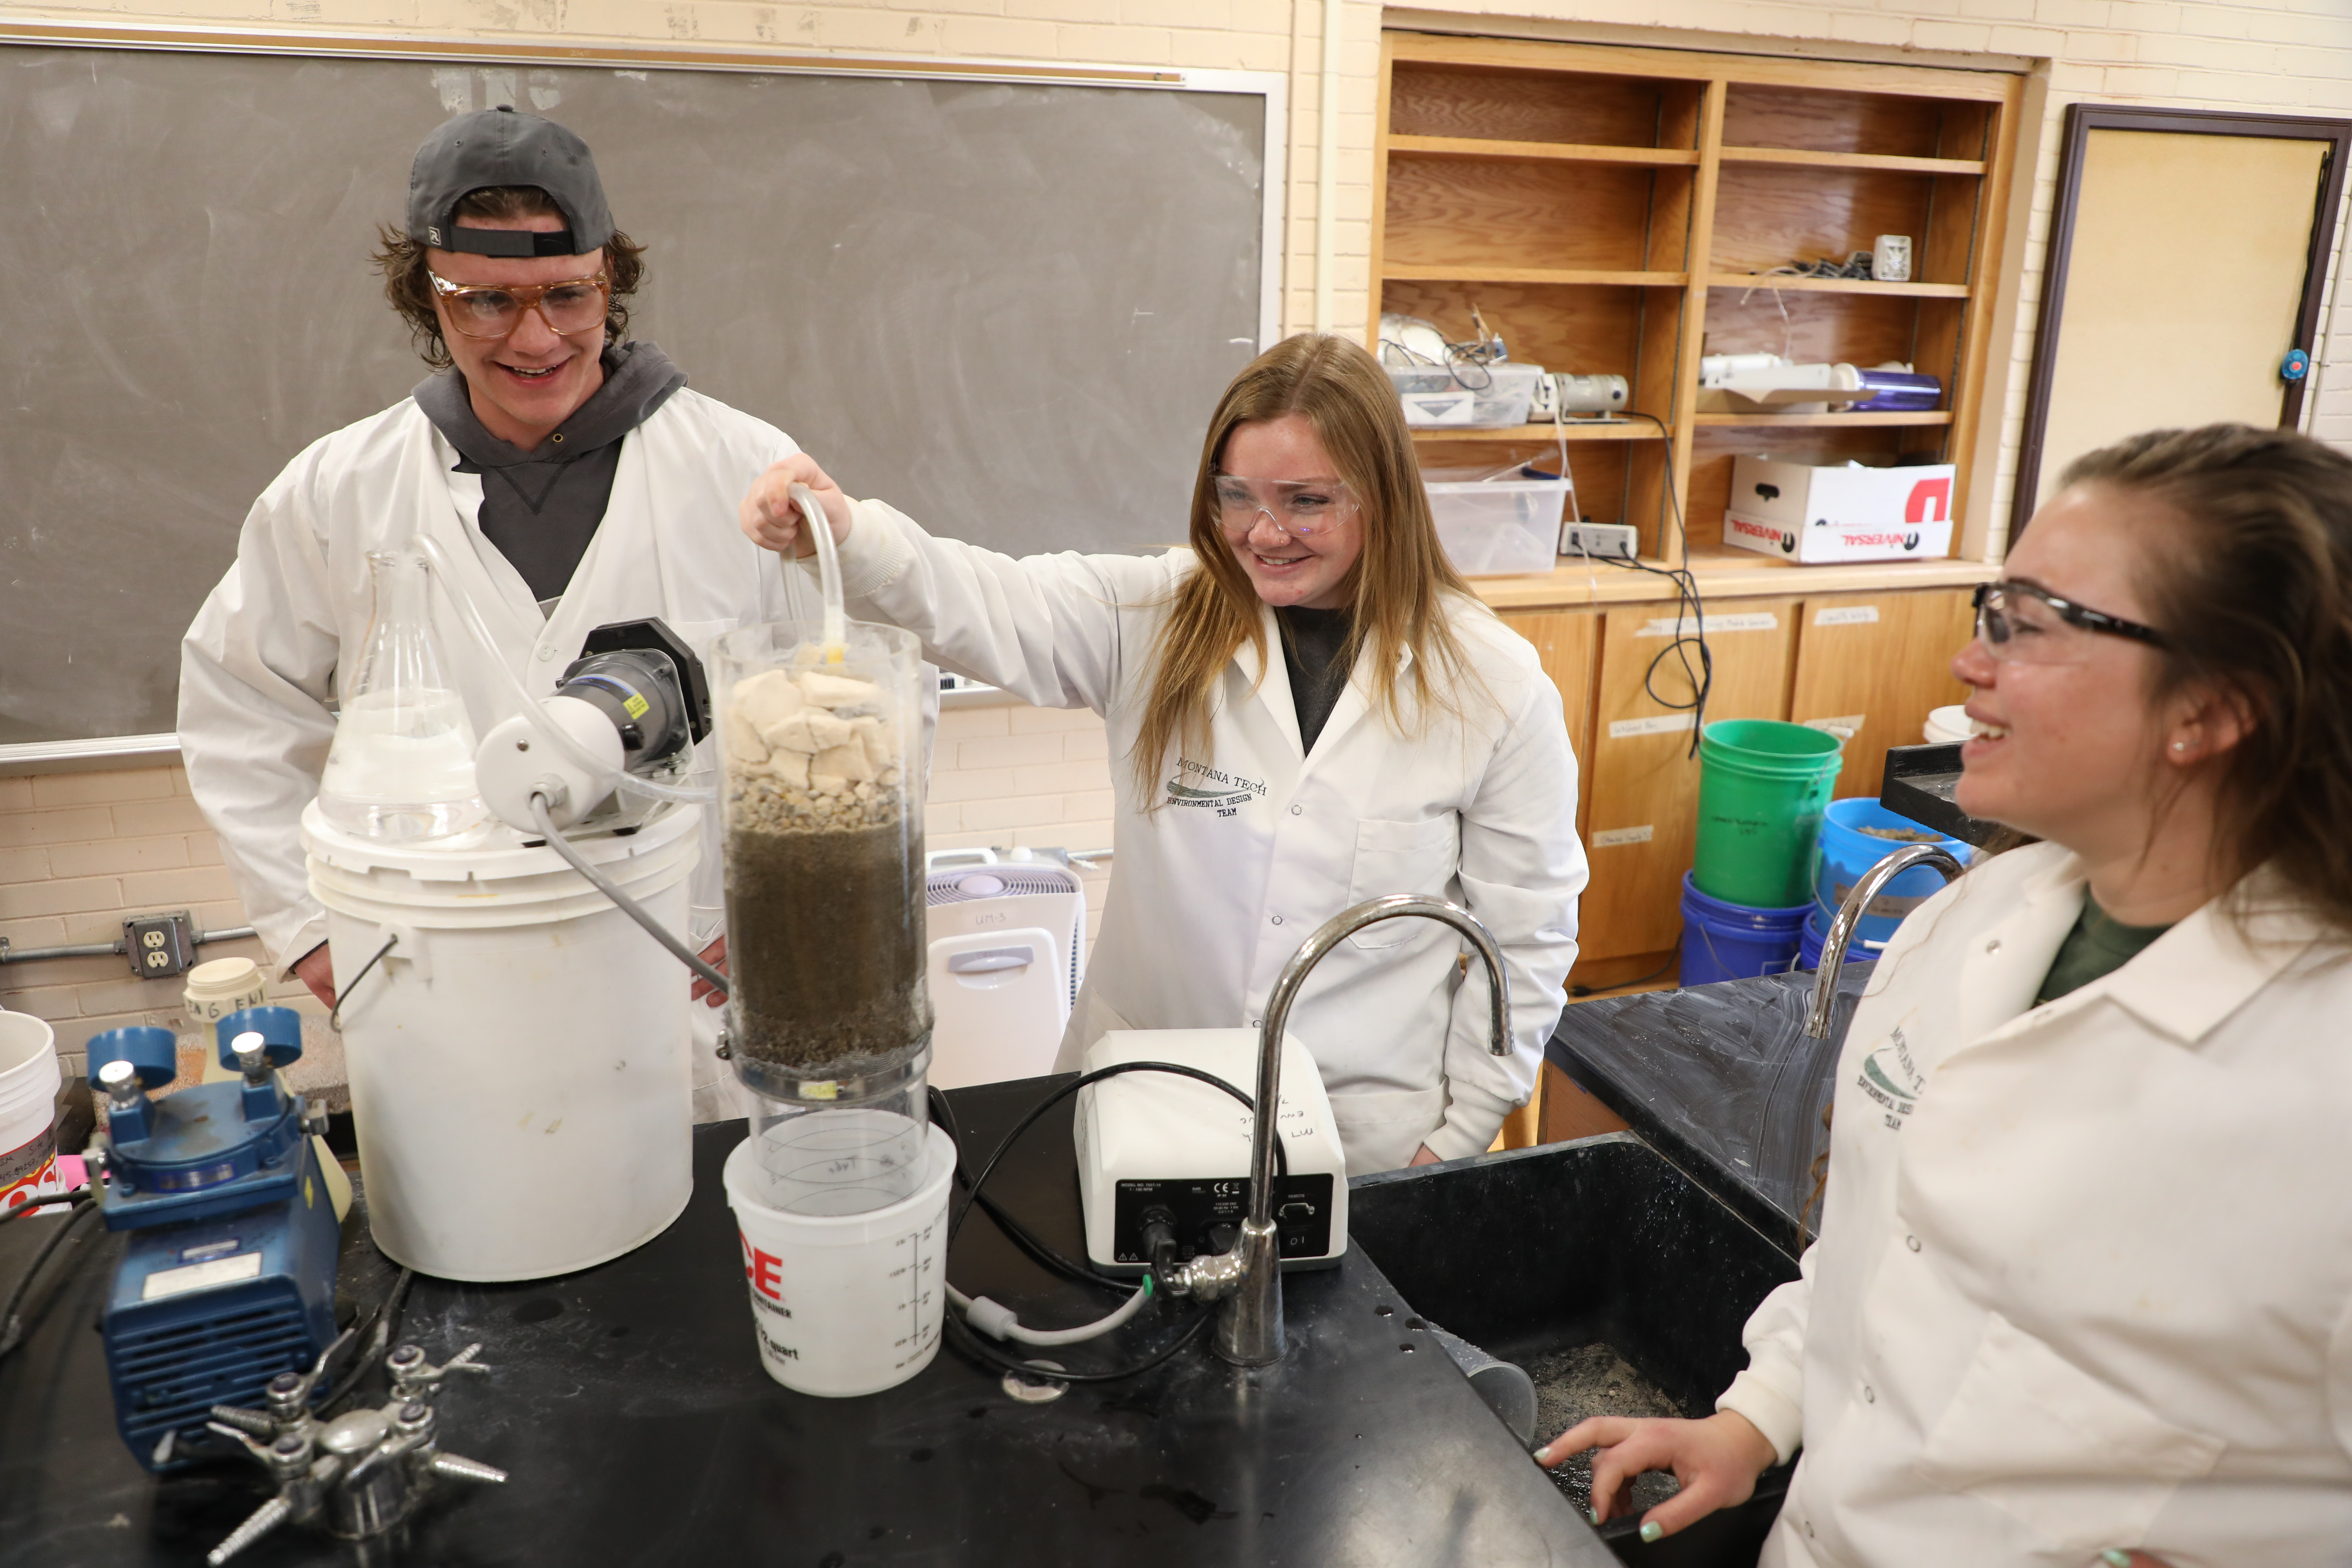 Students work on a science experiment.